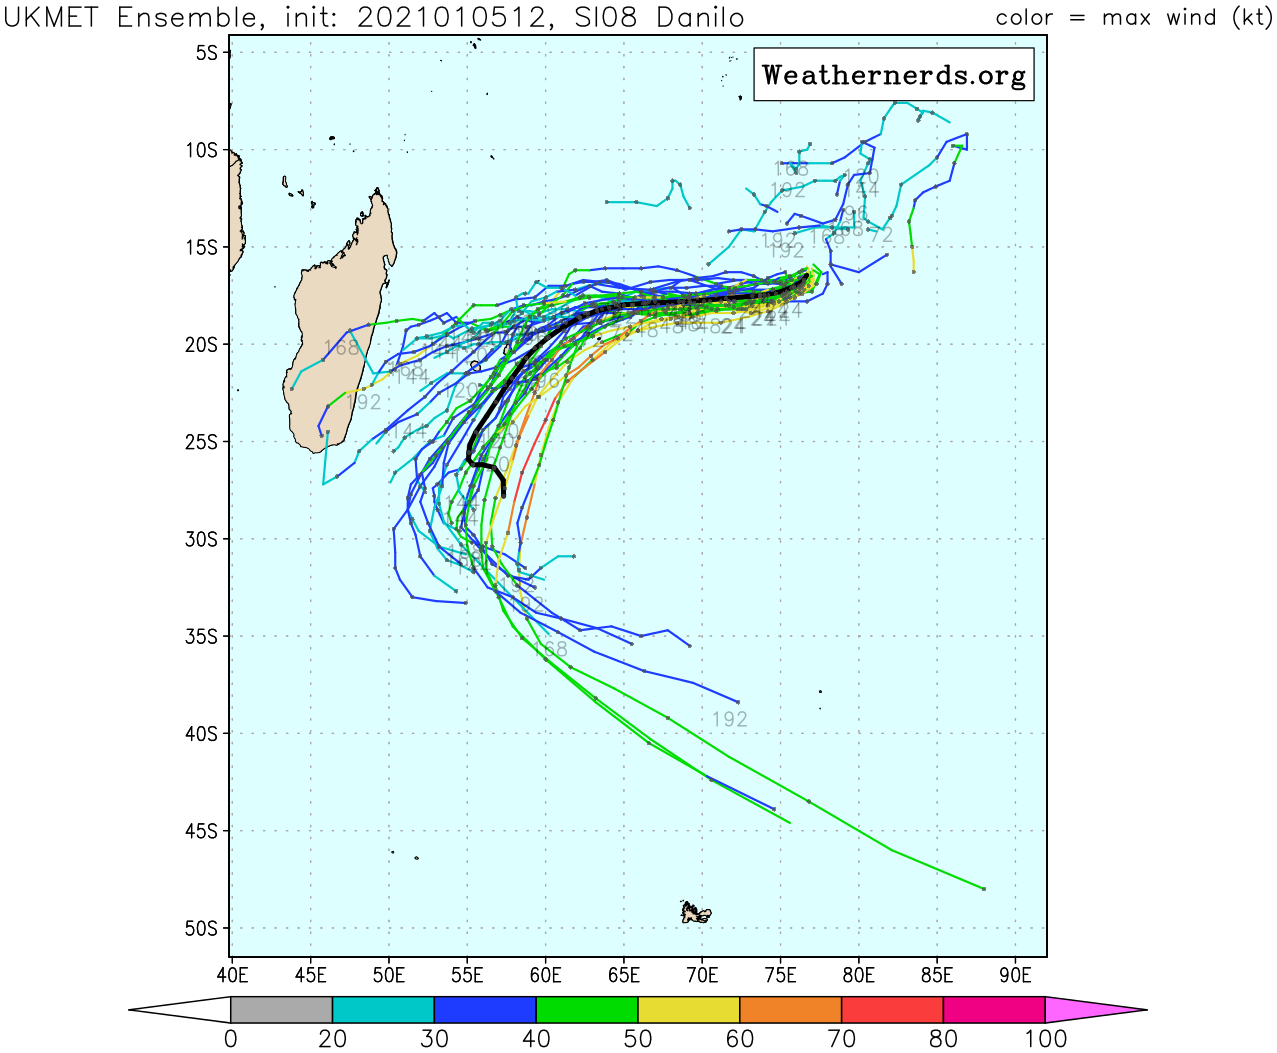 TC 08S.TRACK AND INTENSITY GUIDANE. UKMET IS STILL MORE AGGRESSIVE AND MORE POLEWARD.